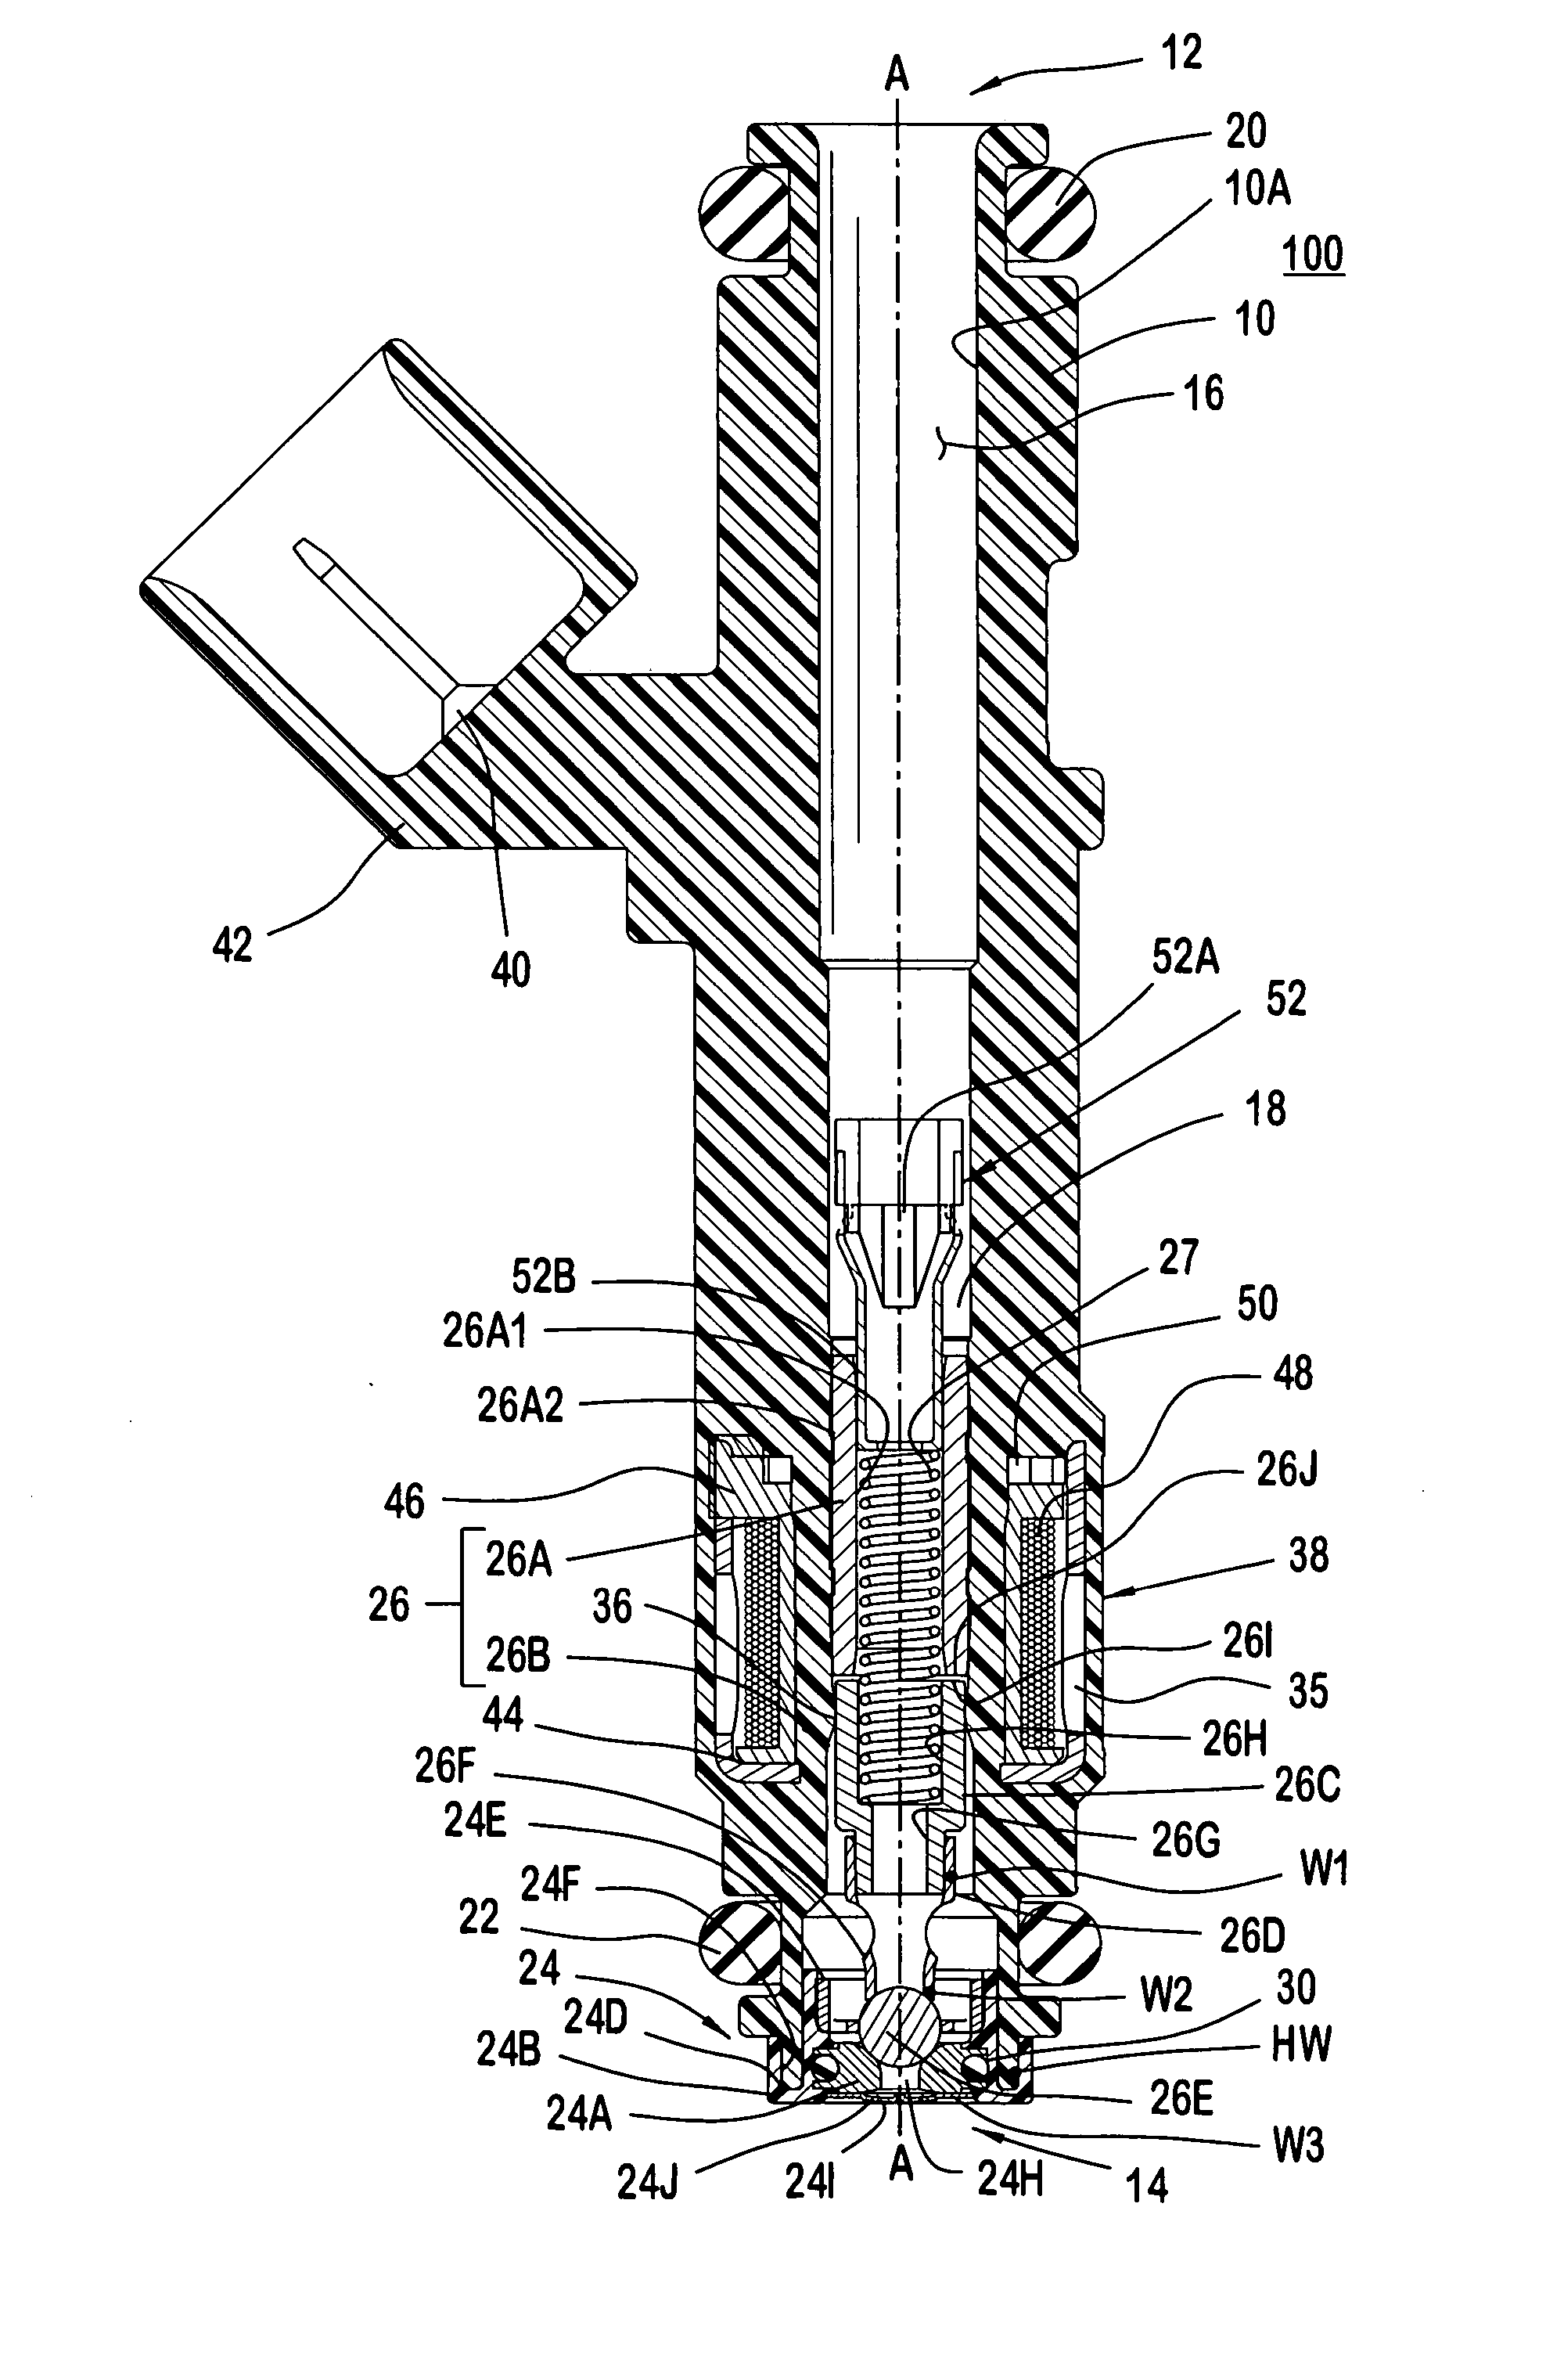 Method of manufacturing a polymeric bodied fuel injector